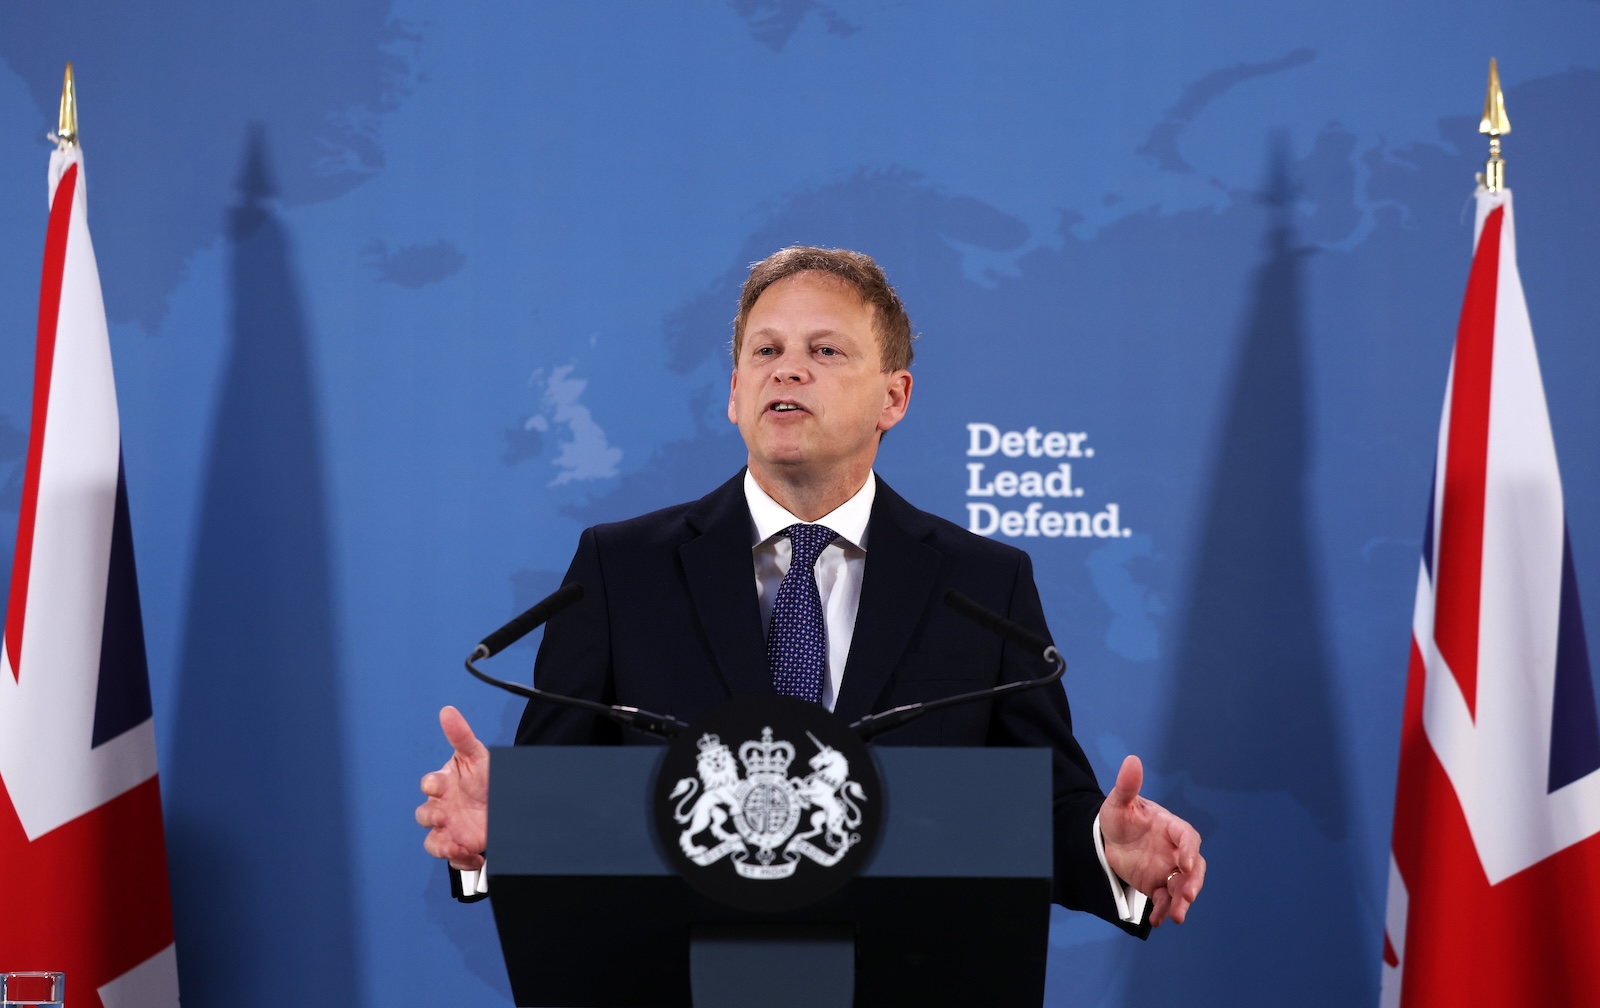 epa11078983 British Defense Minister Grant Shapps delivers a speech in central London, Britain, 15 January 2024. British Secretary of Defense Grant Shapps delivered a speech on the UK's air strikes in Yemen while British Prime Minister Rishi Sunak is expected to make a statement in the House of Commons later on 15 January. The US and Britain carried out military strikes on several Houthis-controlled sites in Yemen in response to recent Houthis attacks on ships in the Red Sea.  EPA/ANDY RAIN